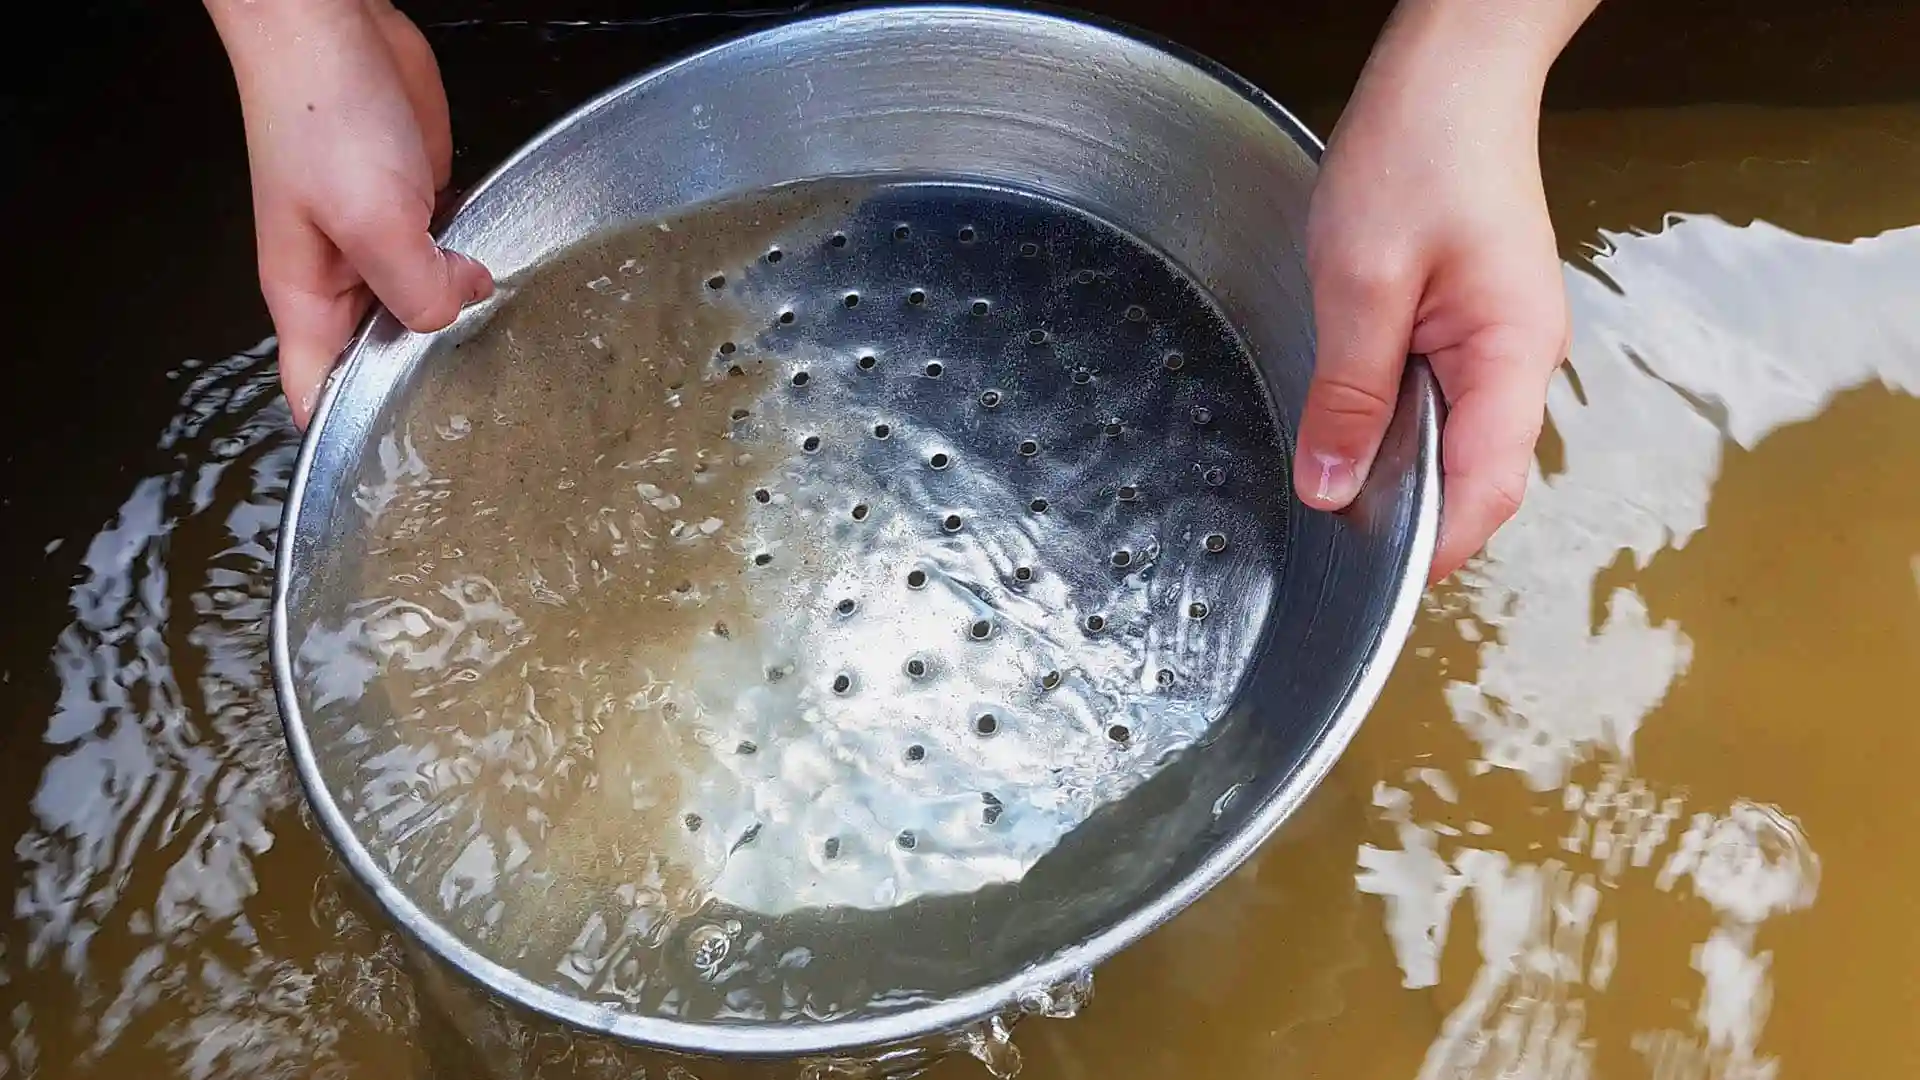 Person holding pan while panning for gold.